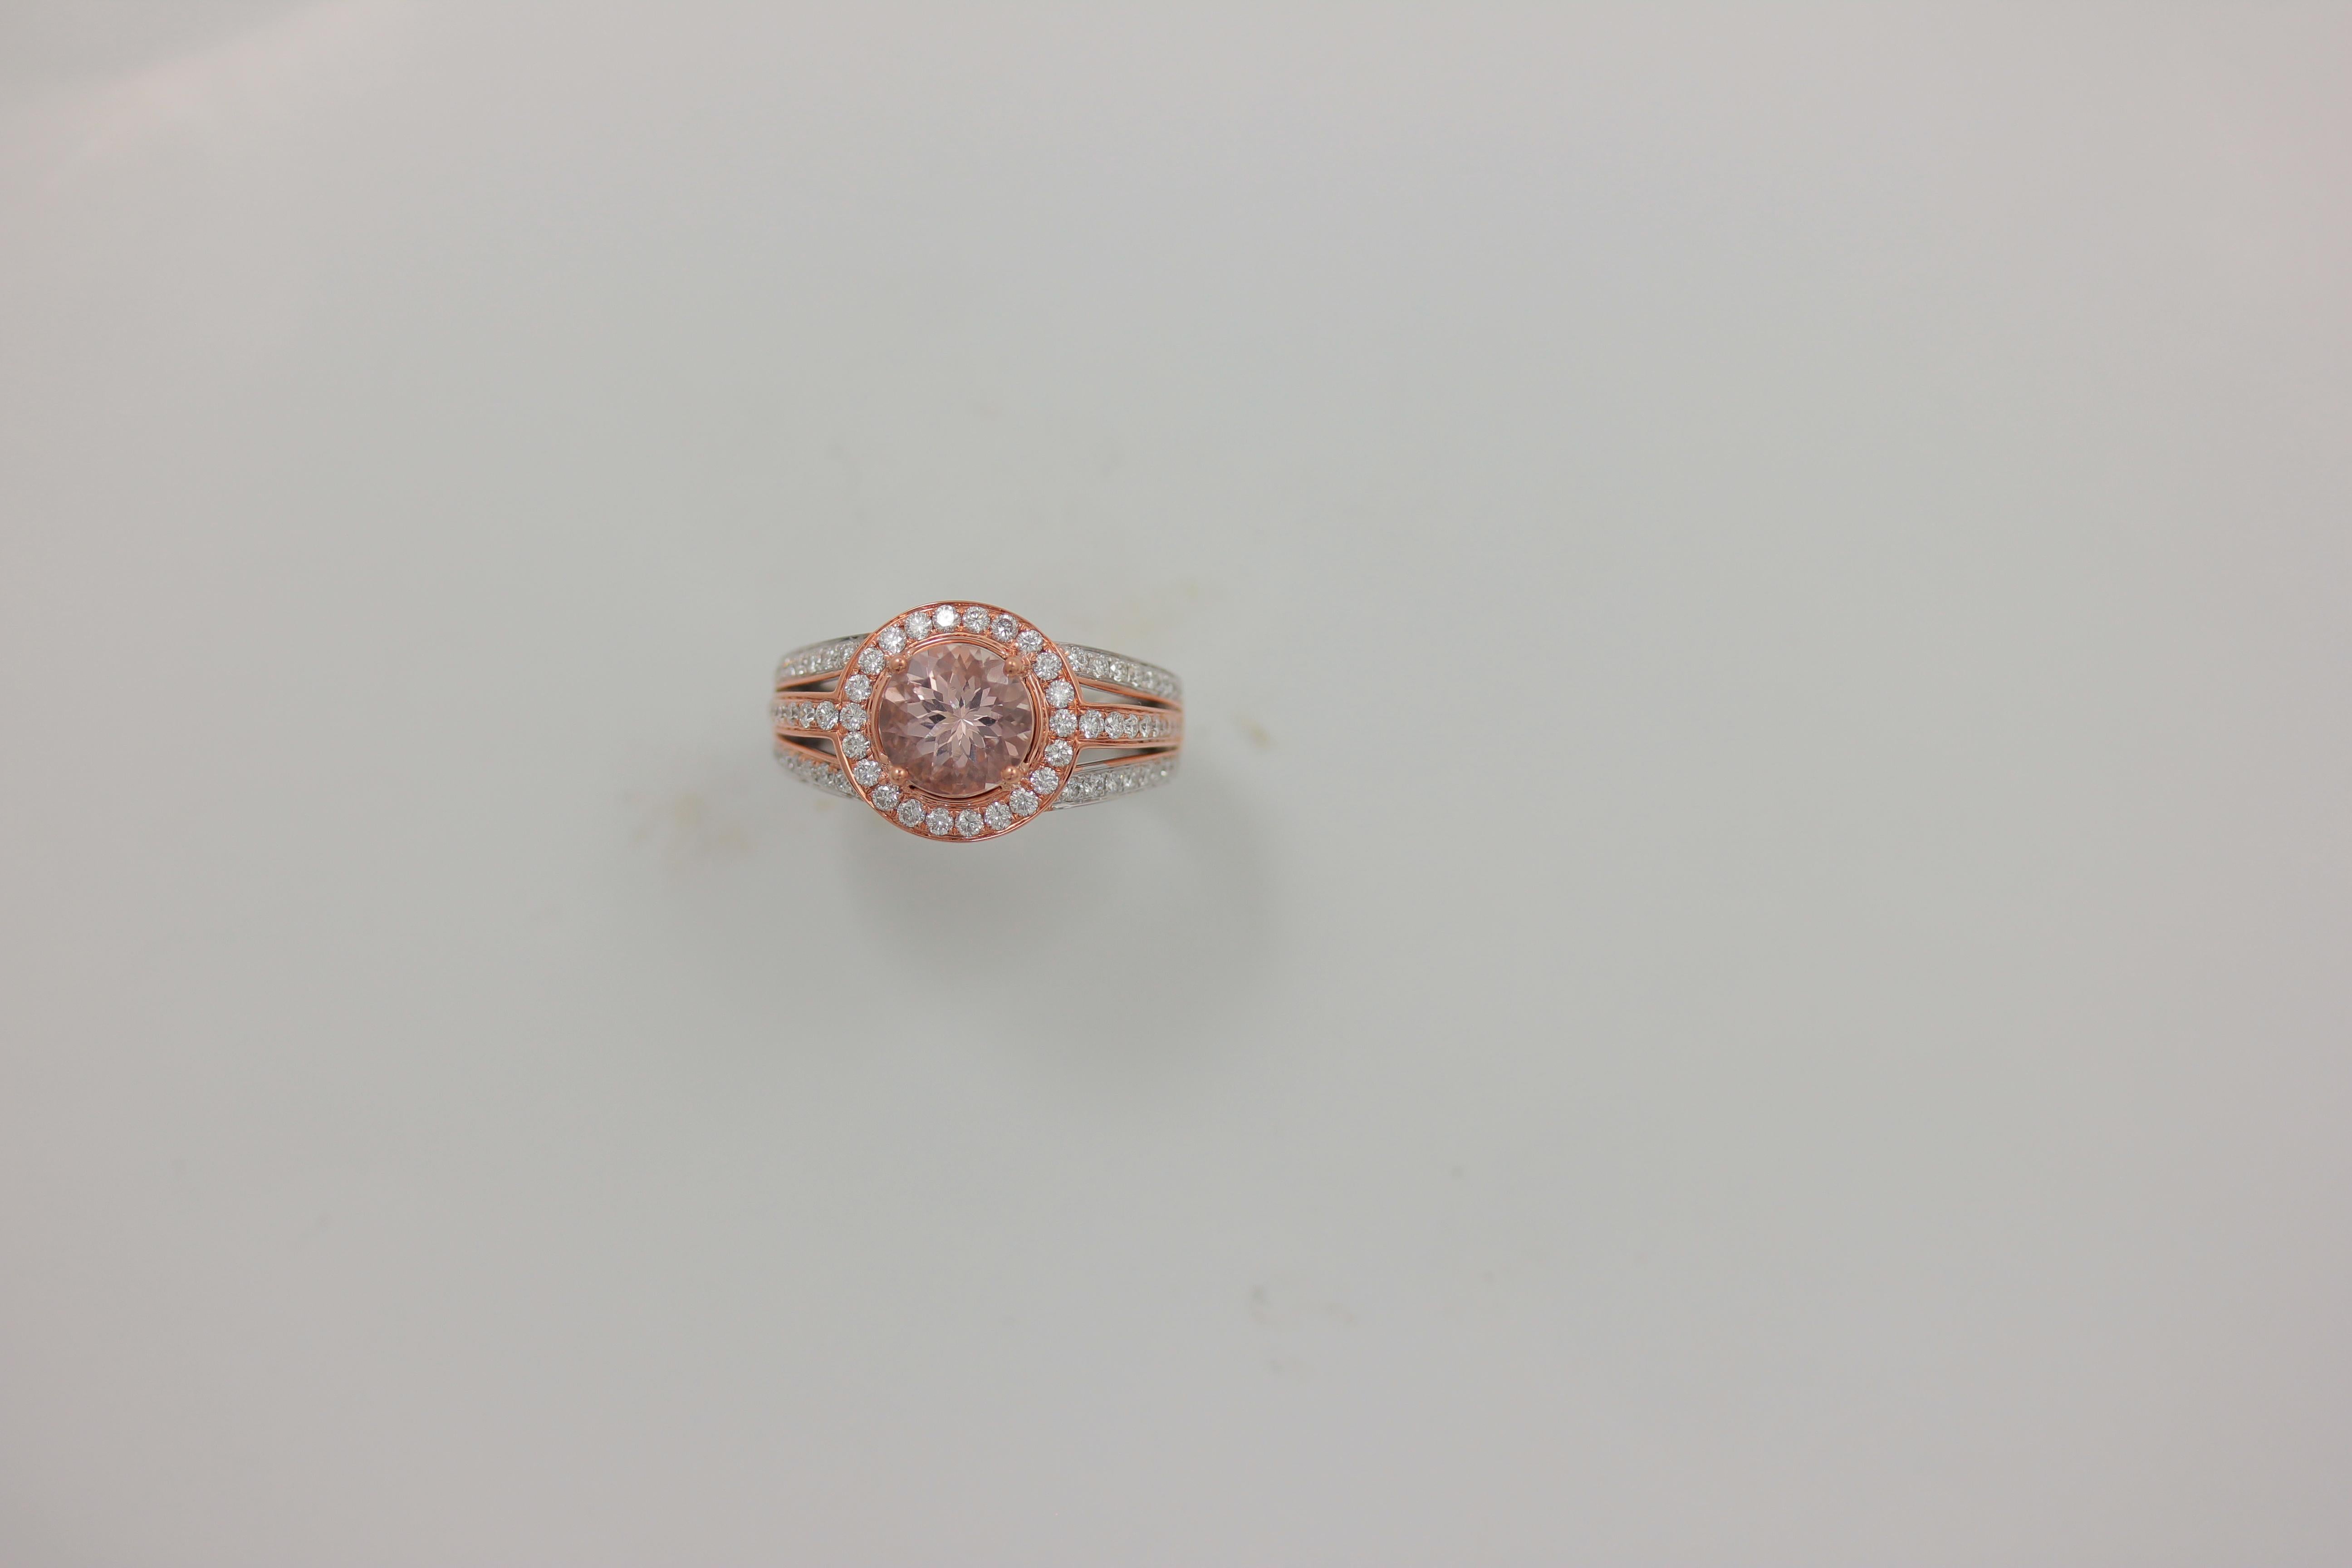 Frederic Sage 1.57 Carat Morganite and Diamond Pink/White Gold Ring For Sale 4